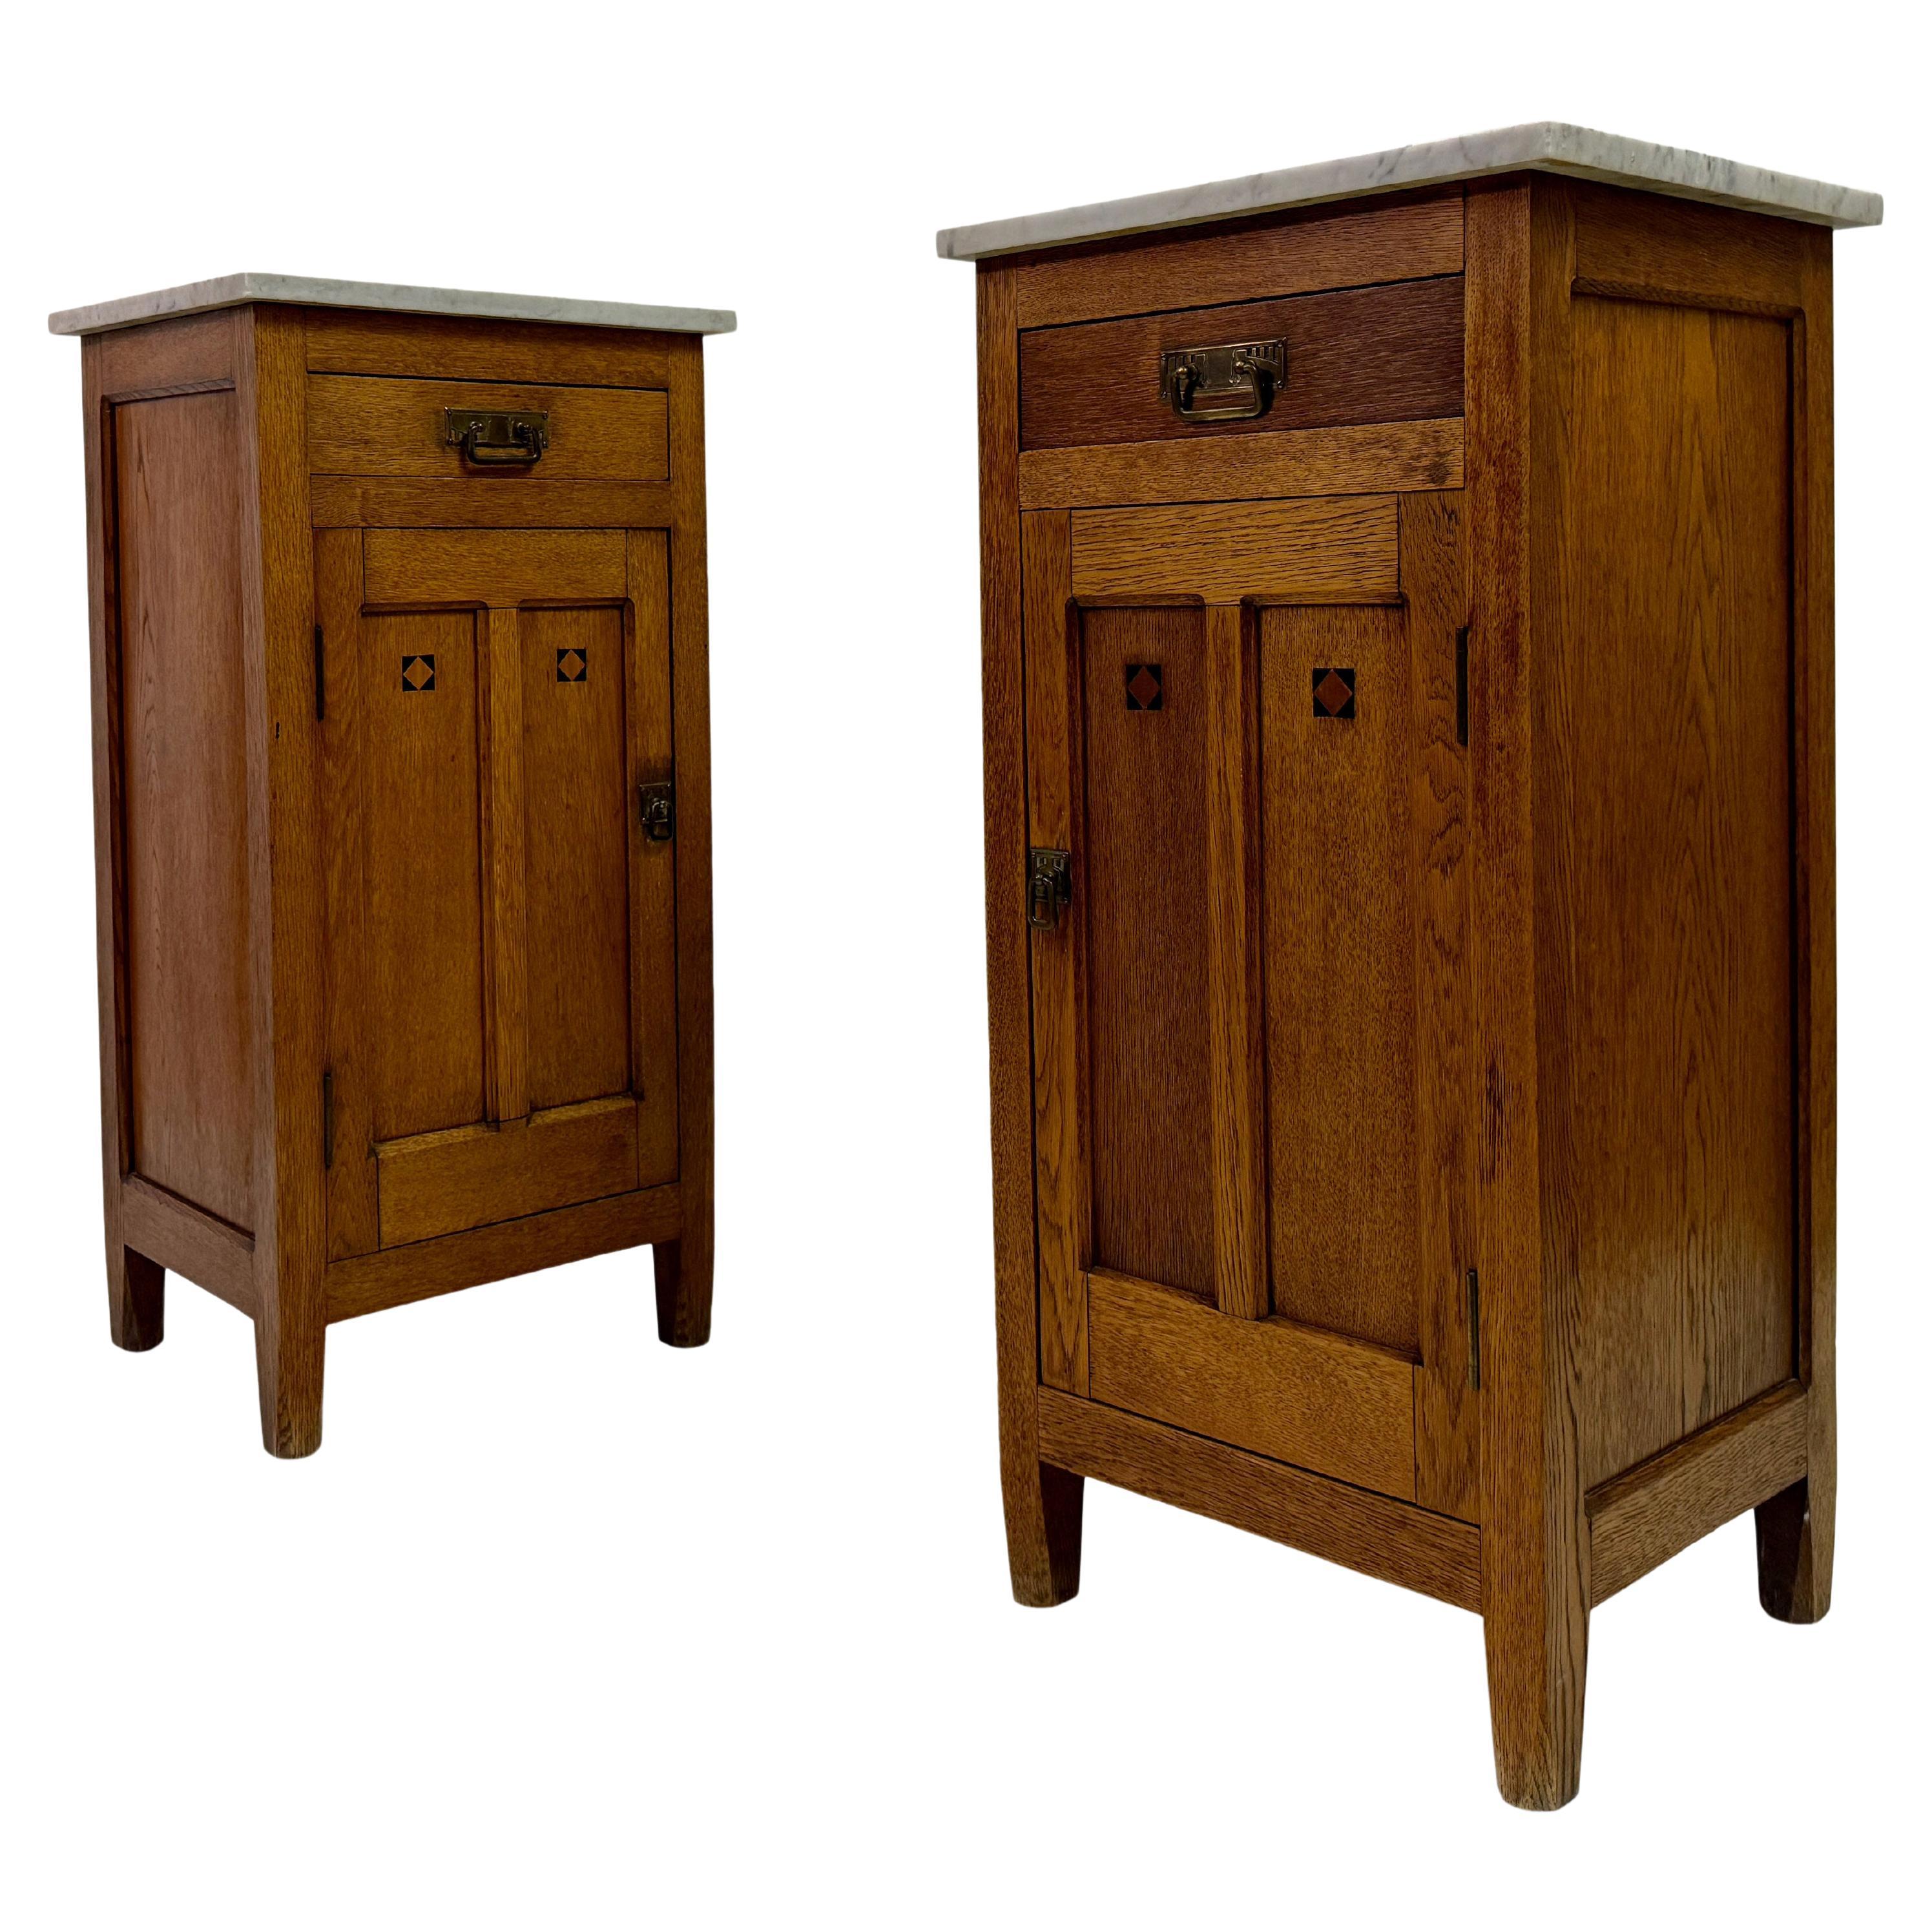 Pair of Early 20th Century Oak Bedside Cabinets with Marble Tops For Sale